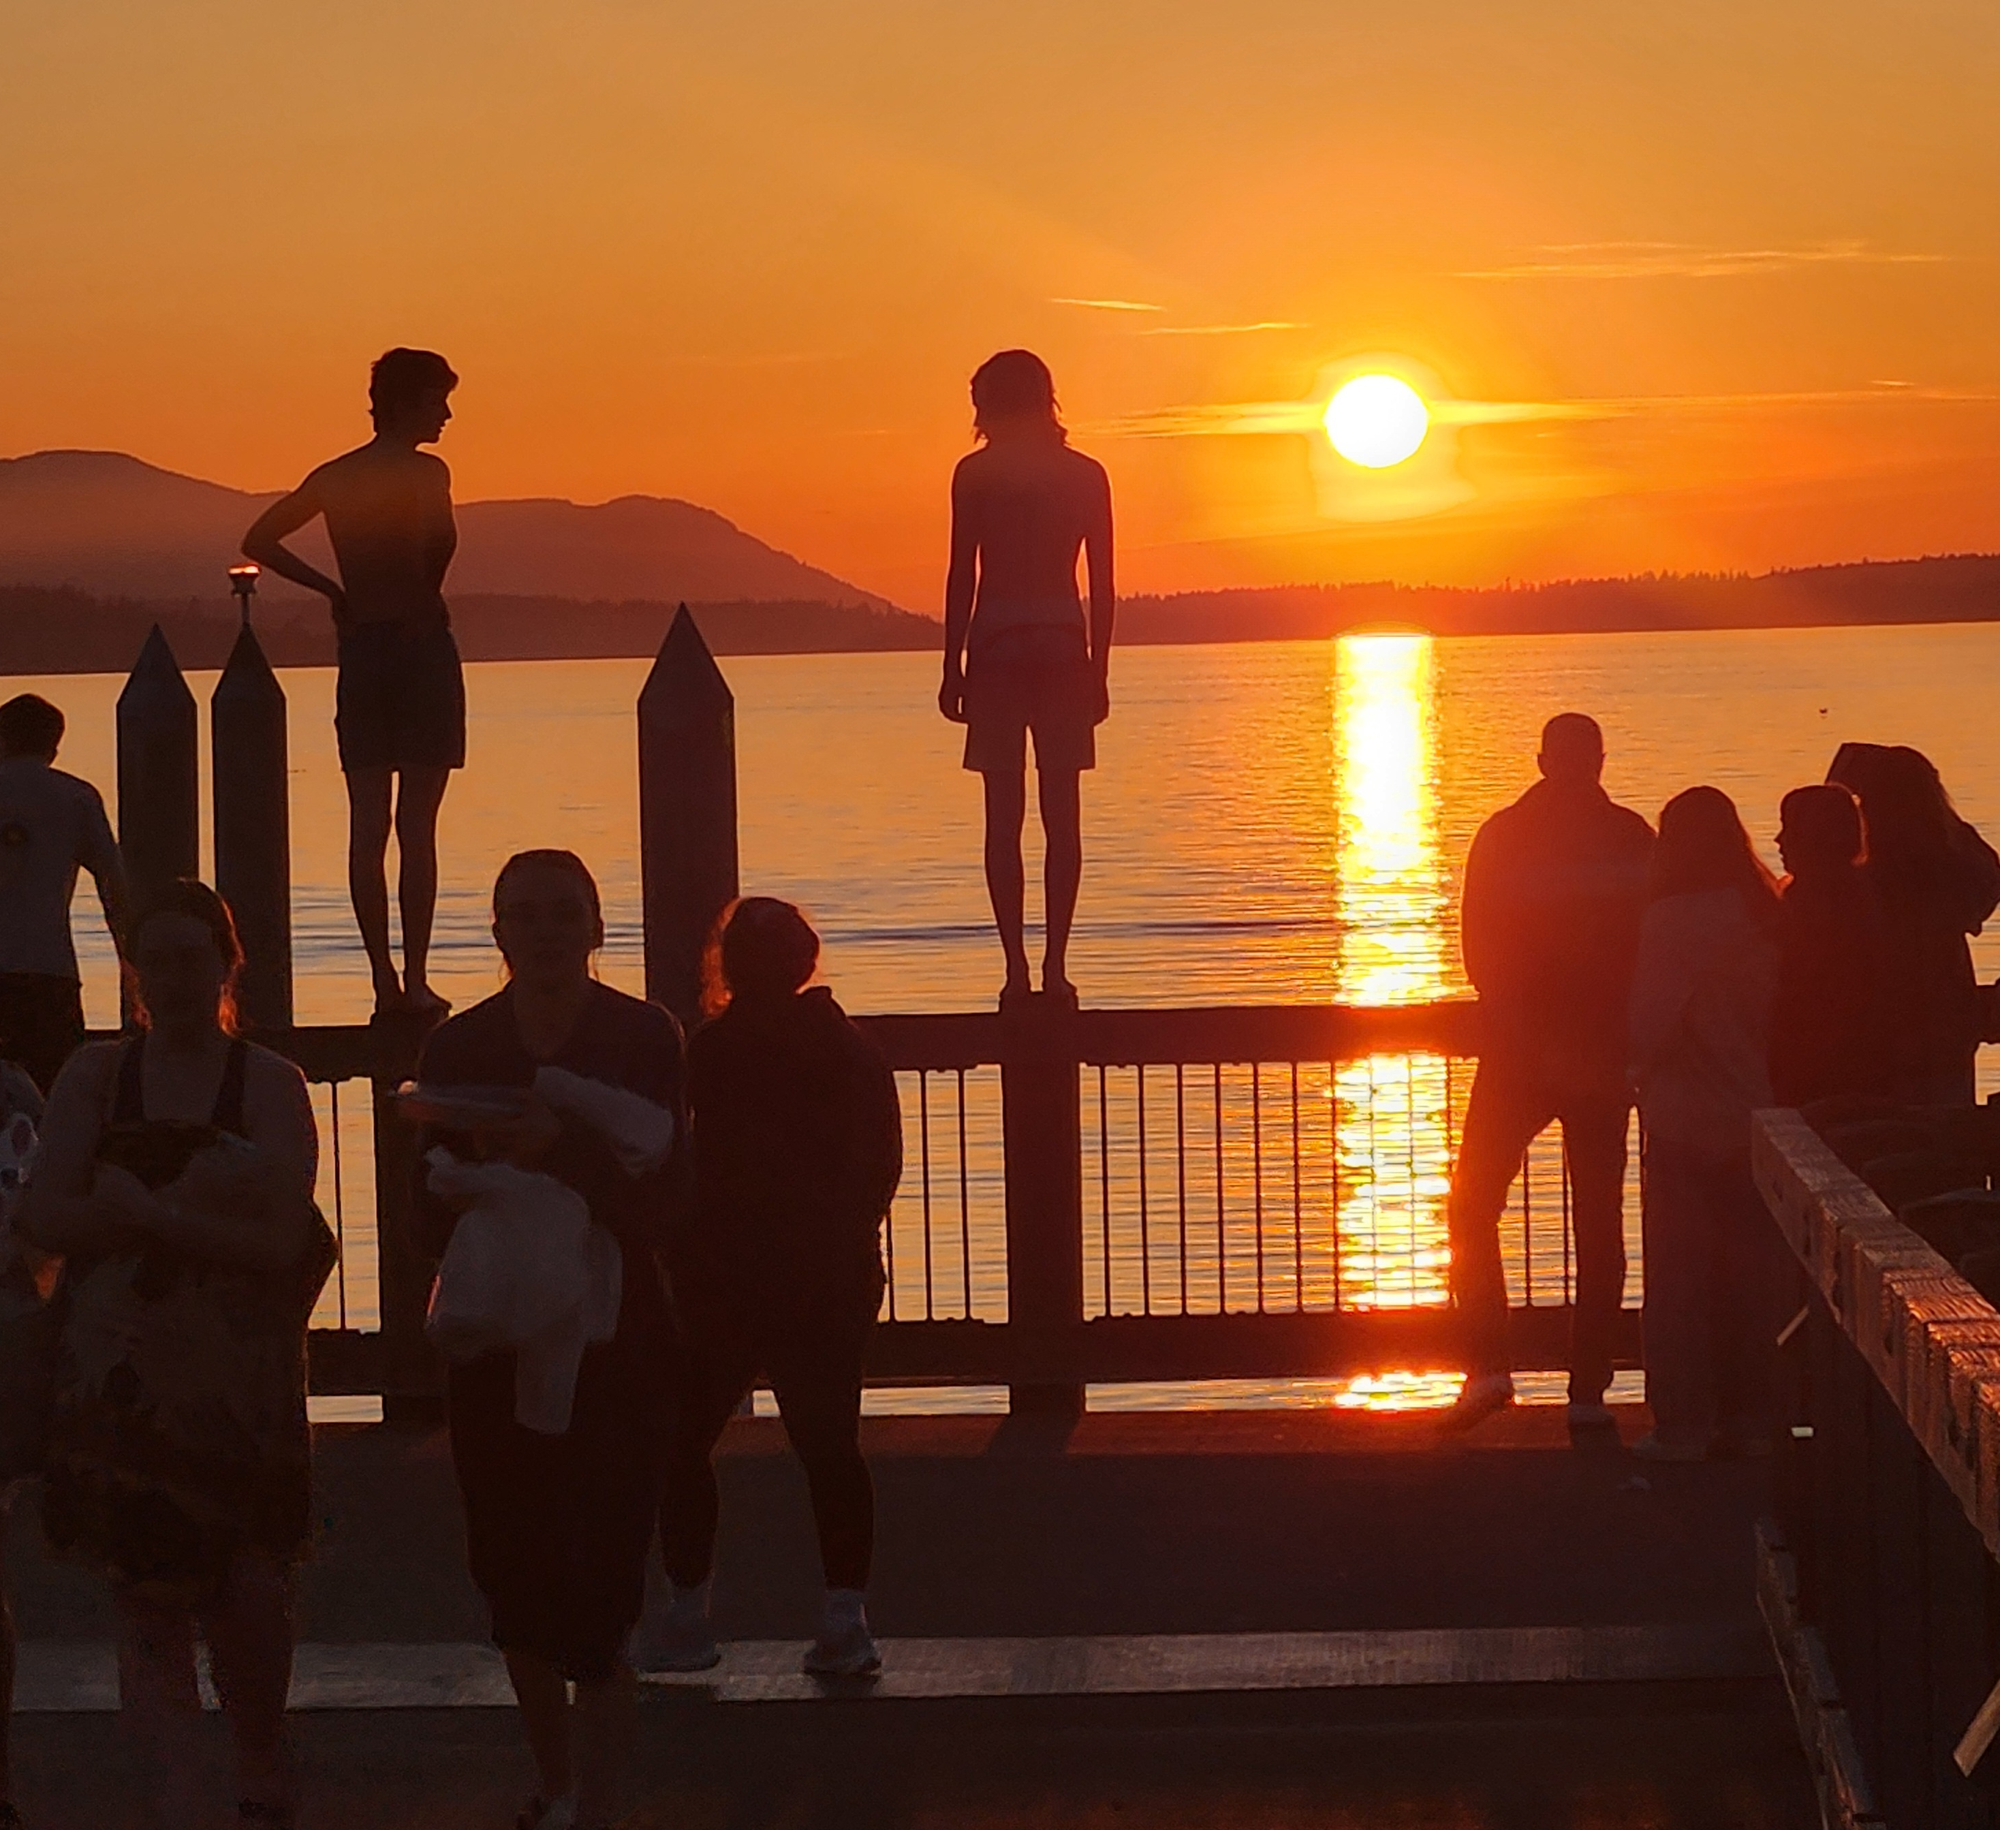 People stand on a railing with others nearby looking at the sunset over the waters of Bellingham Bay.